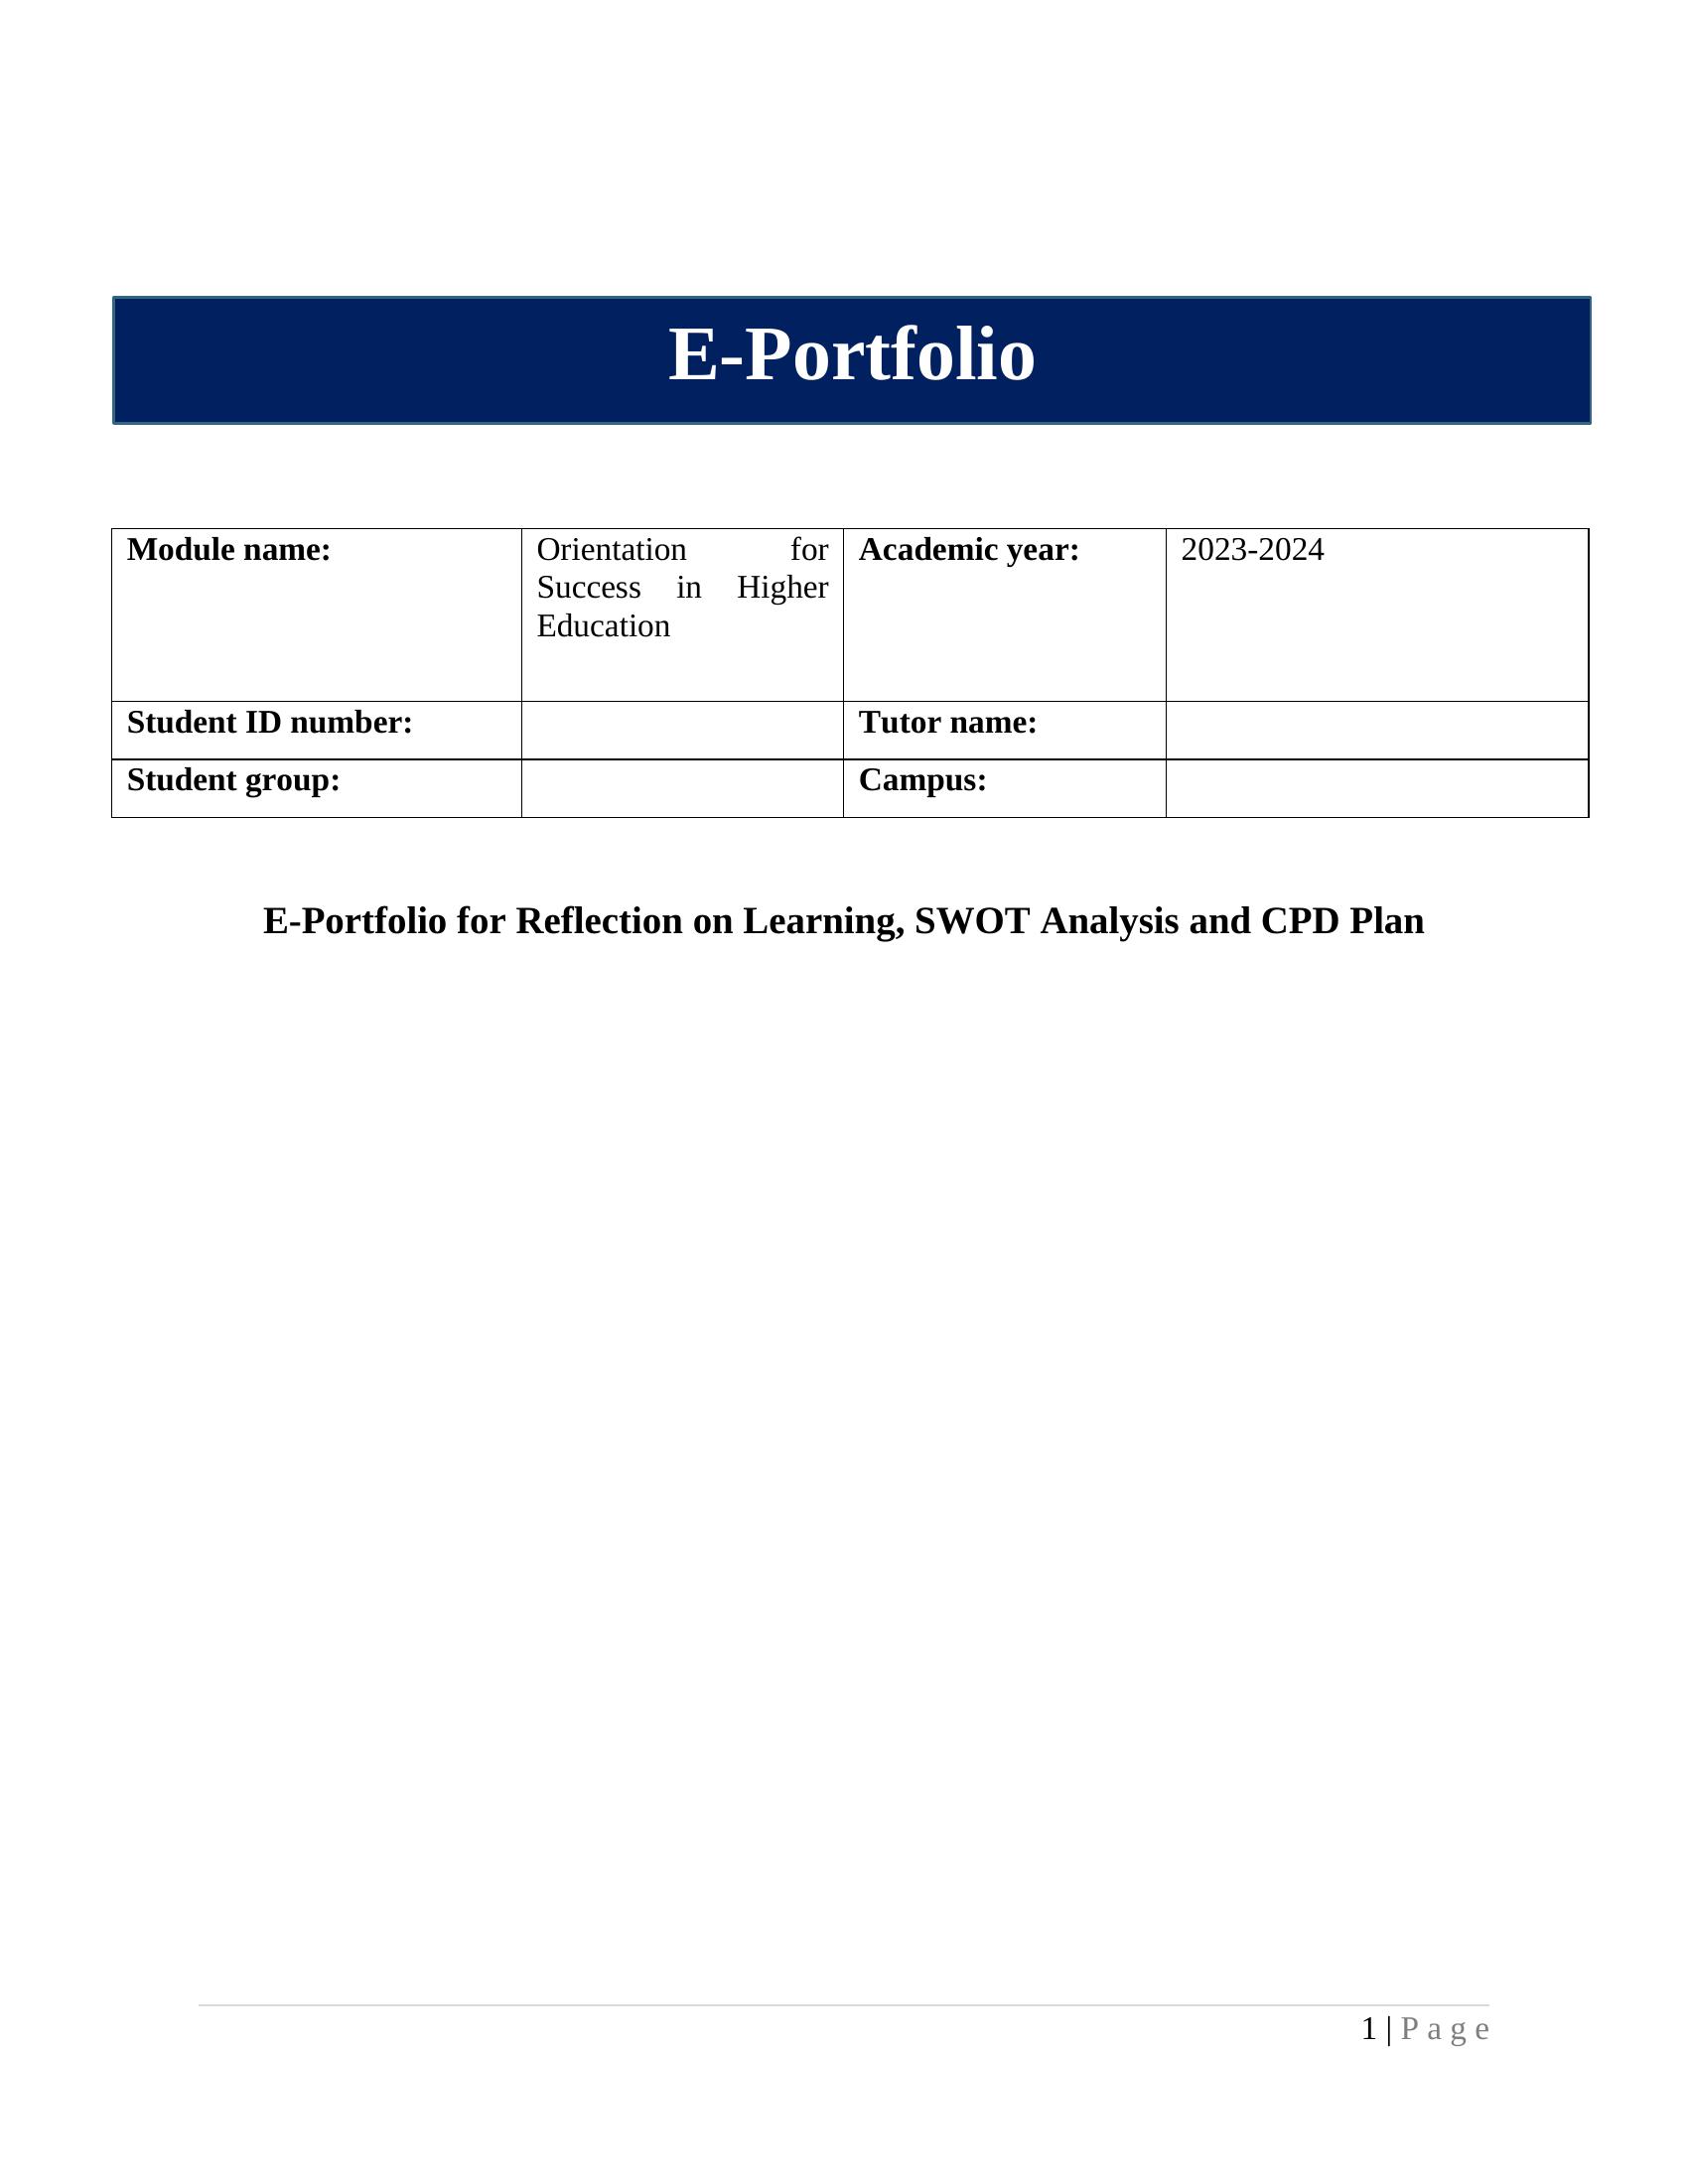 E-Portfolio for Reflection on Learning, SWOT Analysis and CPD Plan